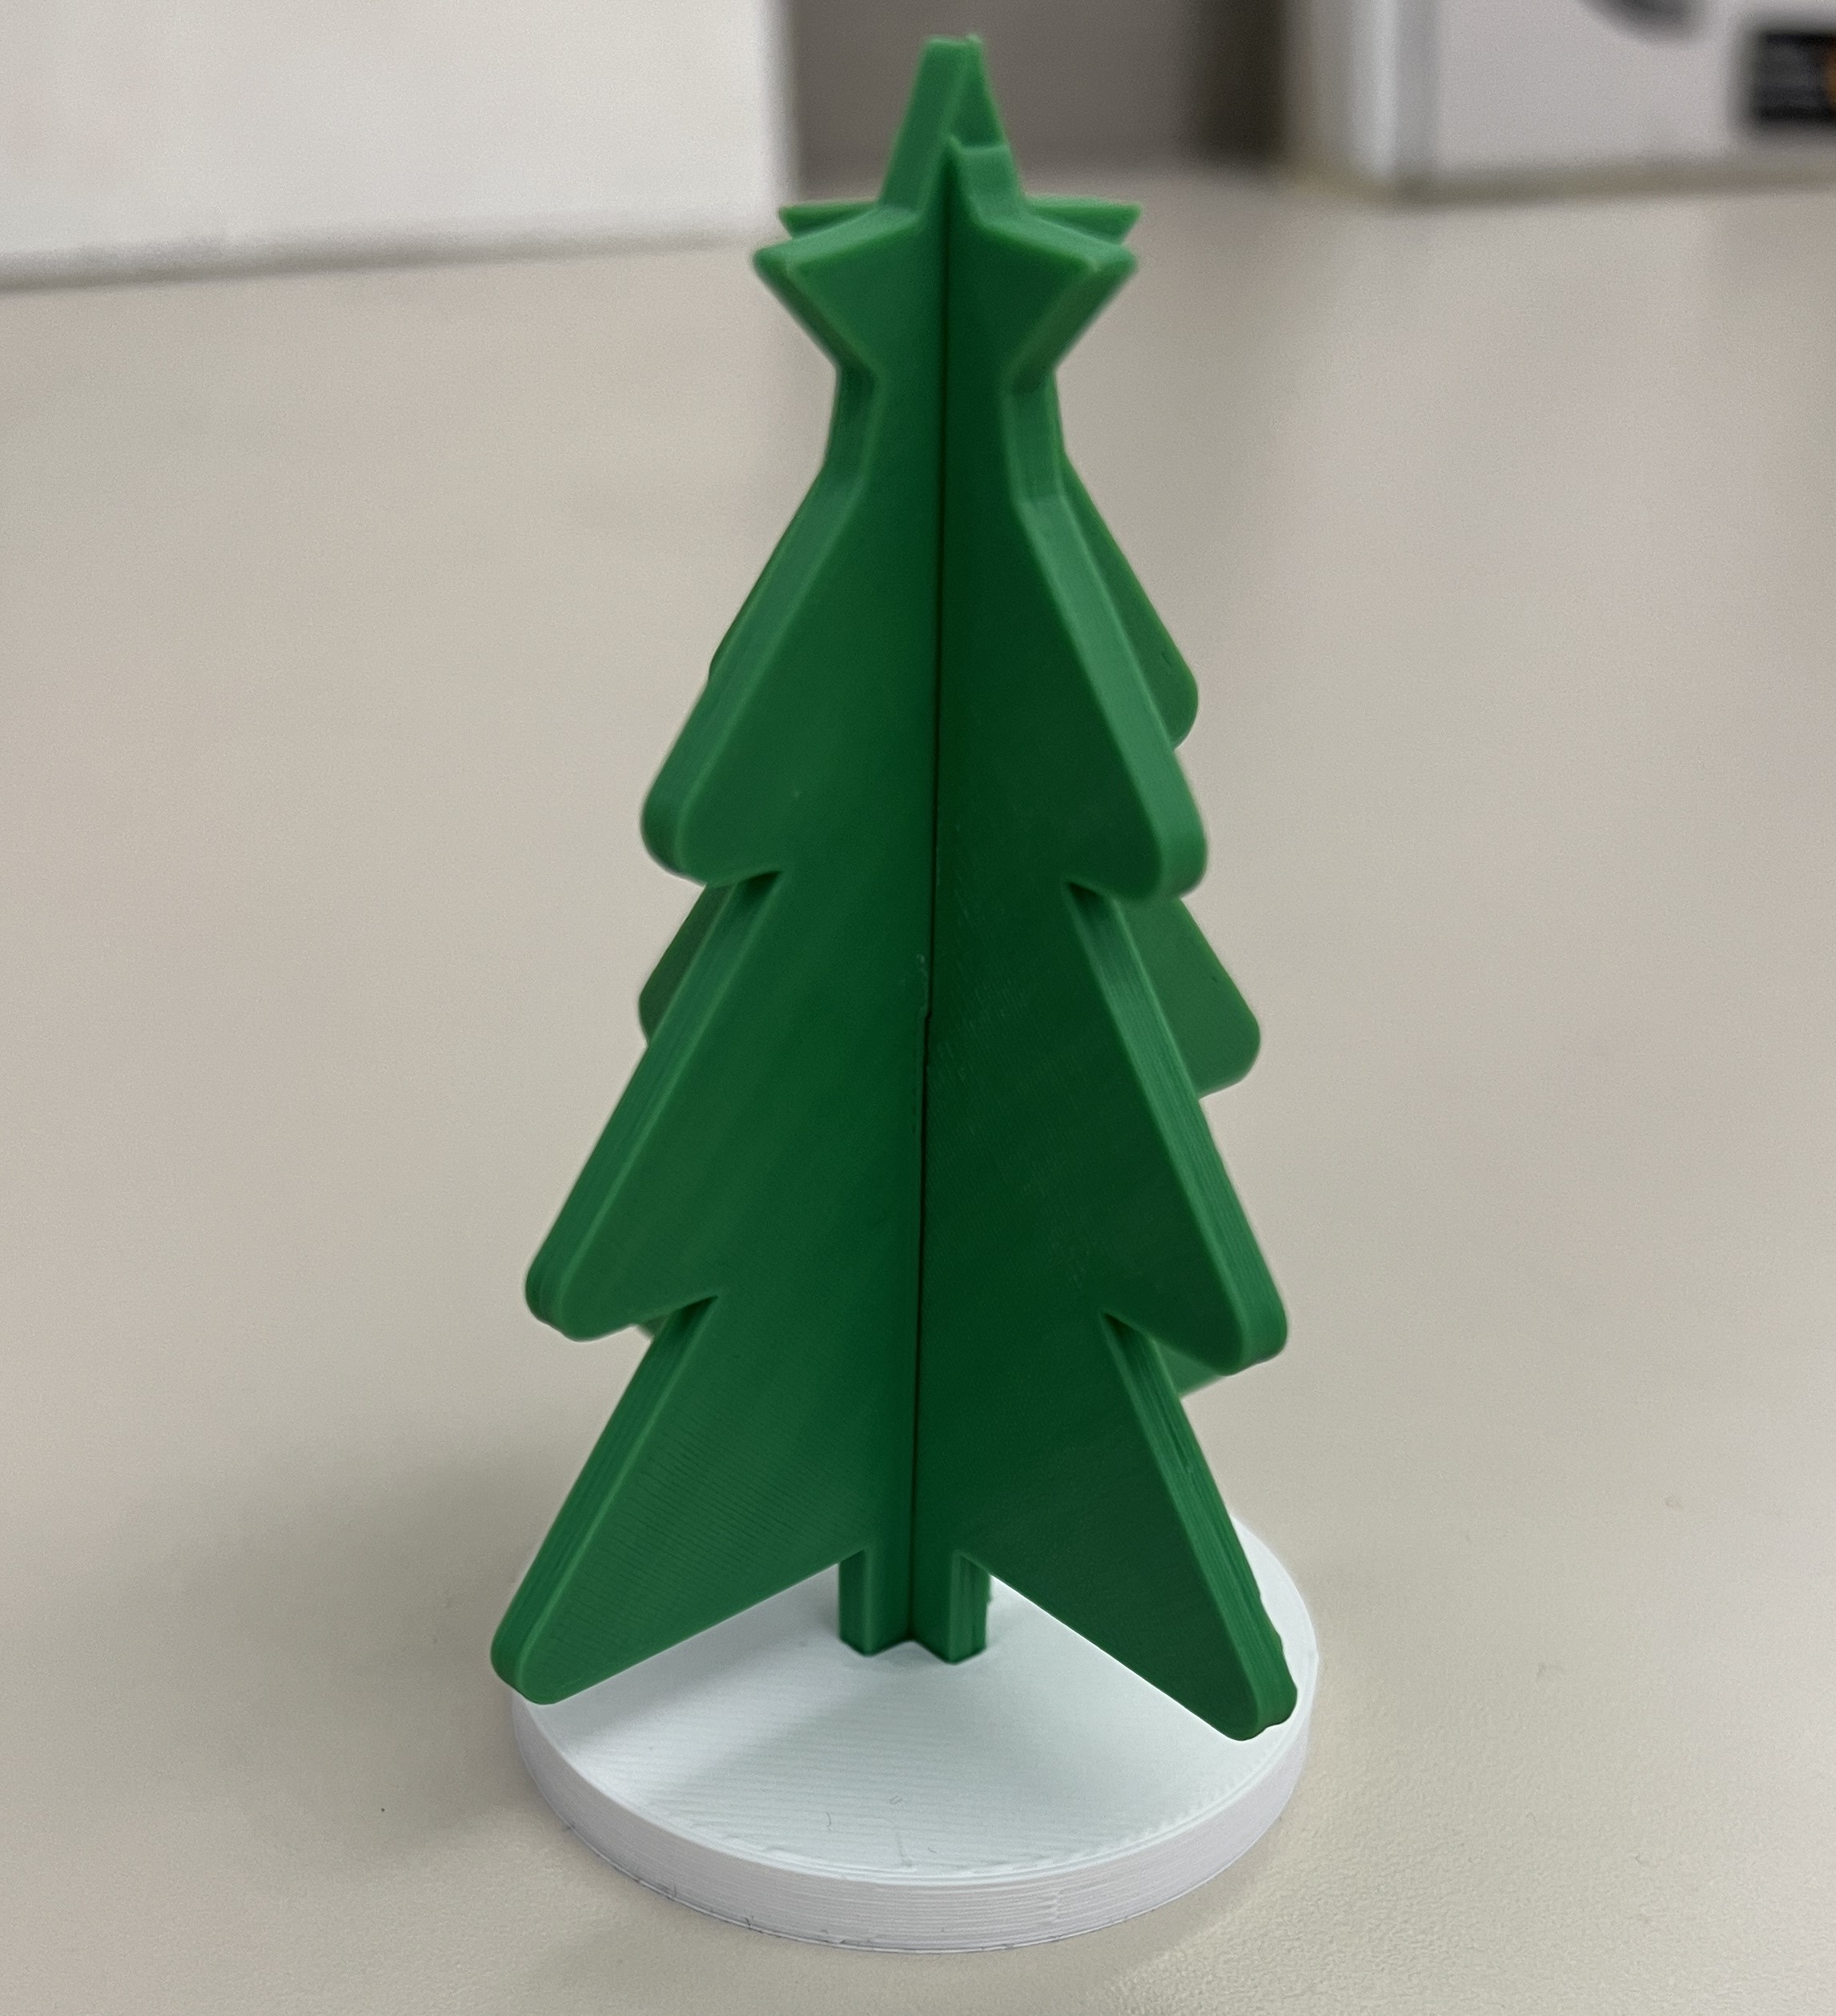 Christmas Tree Ornament (2 pieces) by kyle.kretzschmar | Download free ...